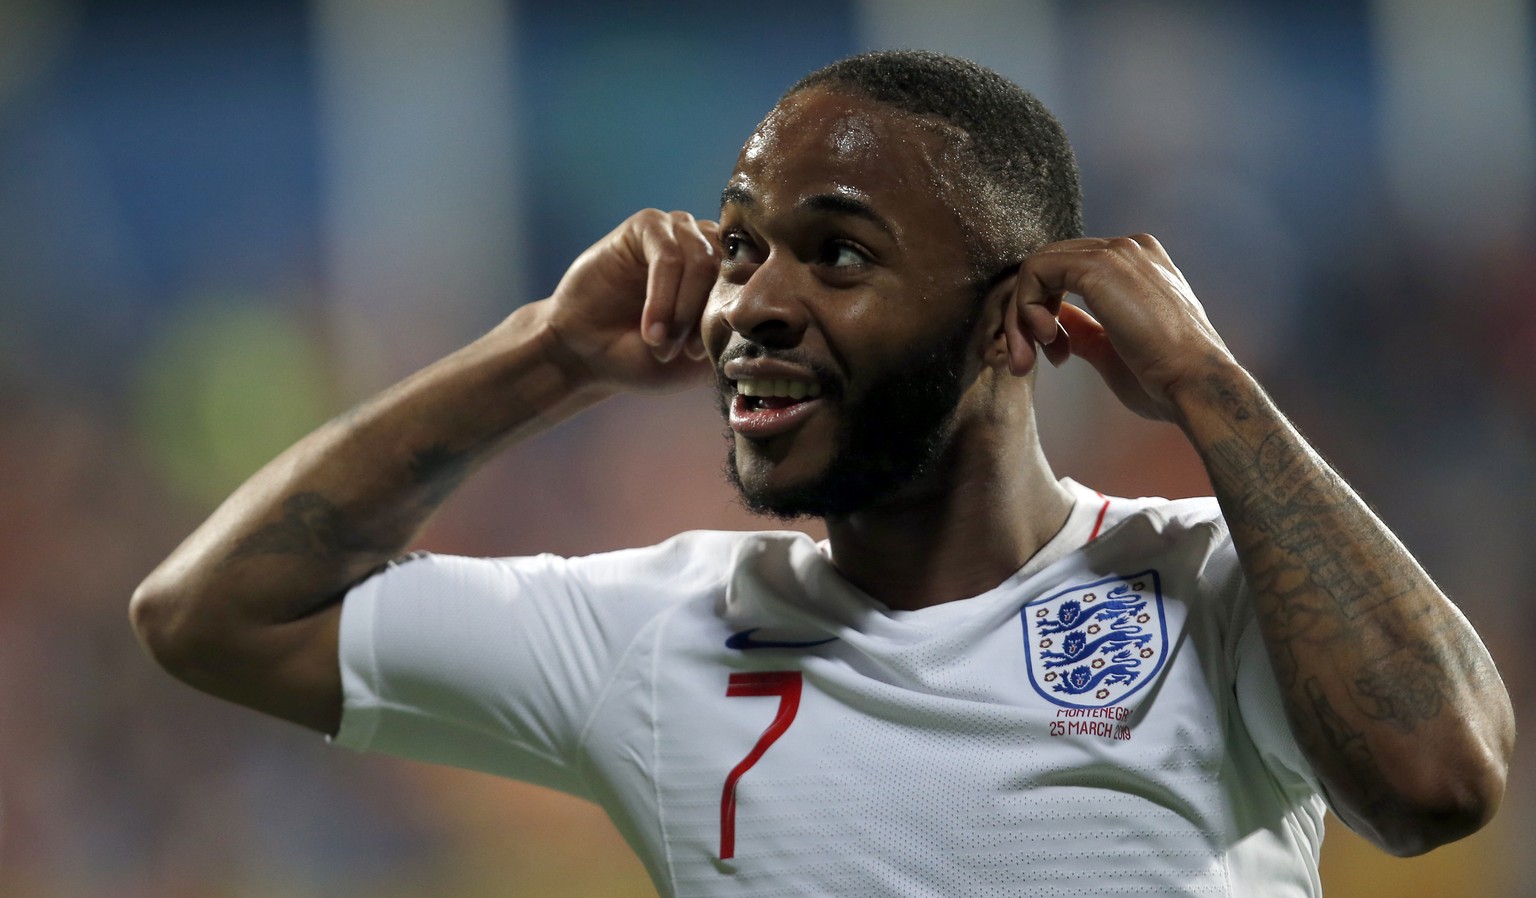 England&#039;s Raheem Sterling celebrates scoring his side&#039;s fifth goal during the Euro 2020 group A qualifying soccer match between Montenegro and England at the City Stadium in Podgorica, Monte ...